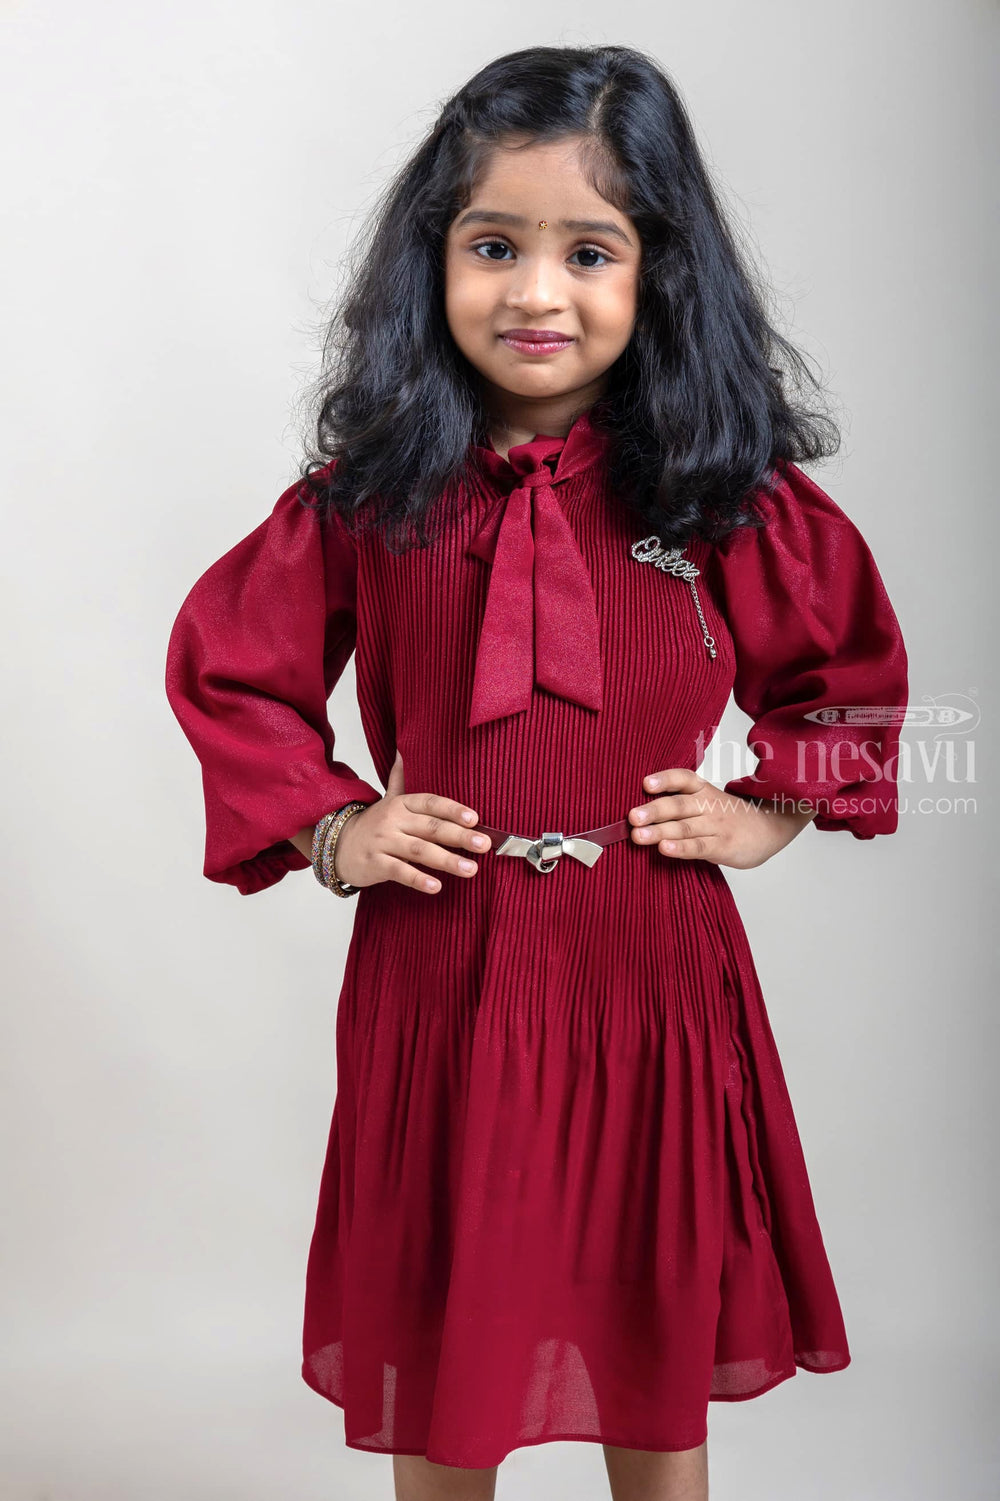 The Nesavu Girls Fancy Frock Small Pleated Maroon Frock with Balloon Sleeves for Baby Girls Nesavu Small Pleated Maroon Frock with Balloon Sleeves for Baby Girls | The Nesavu